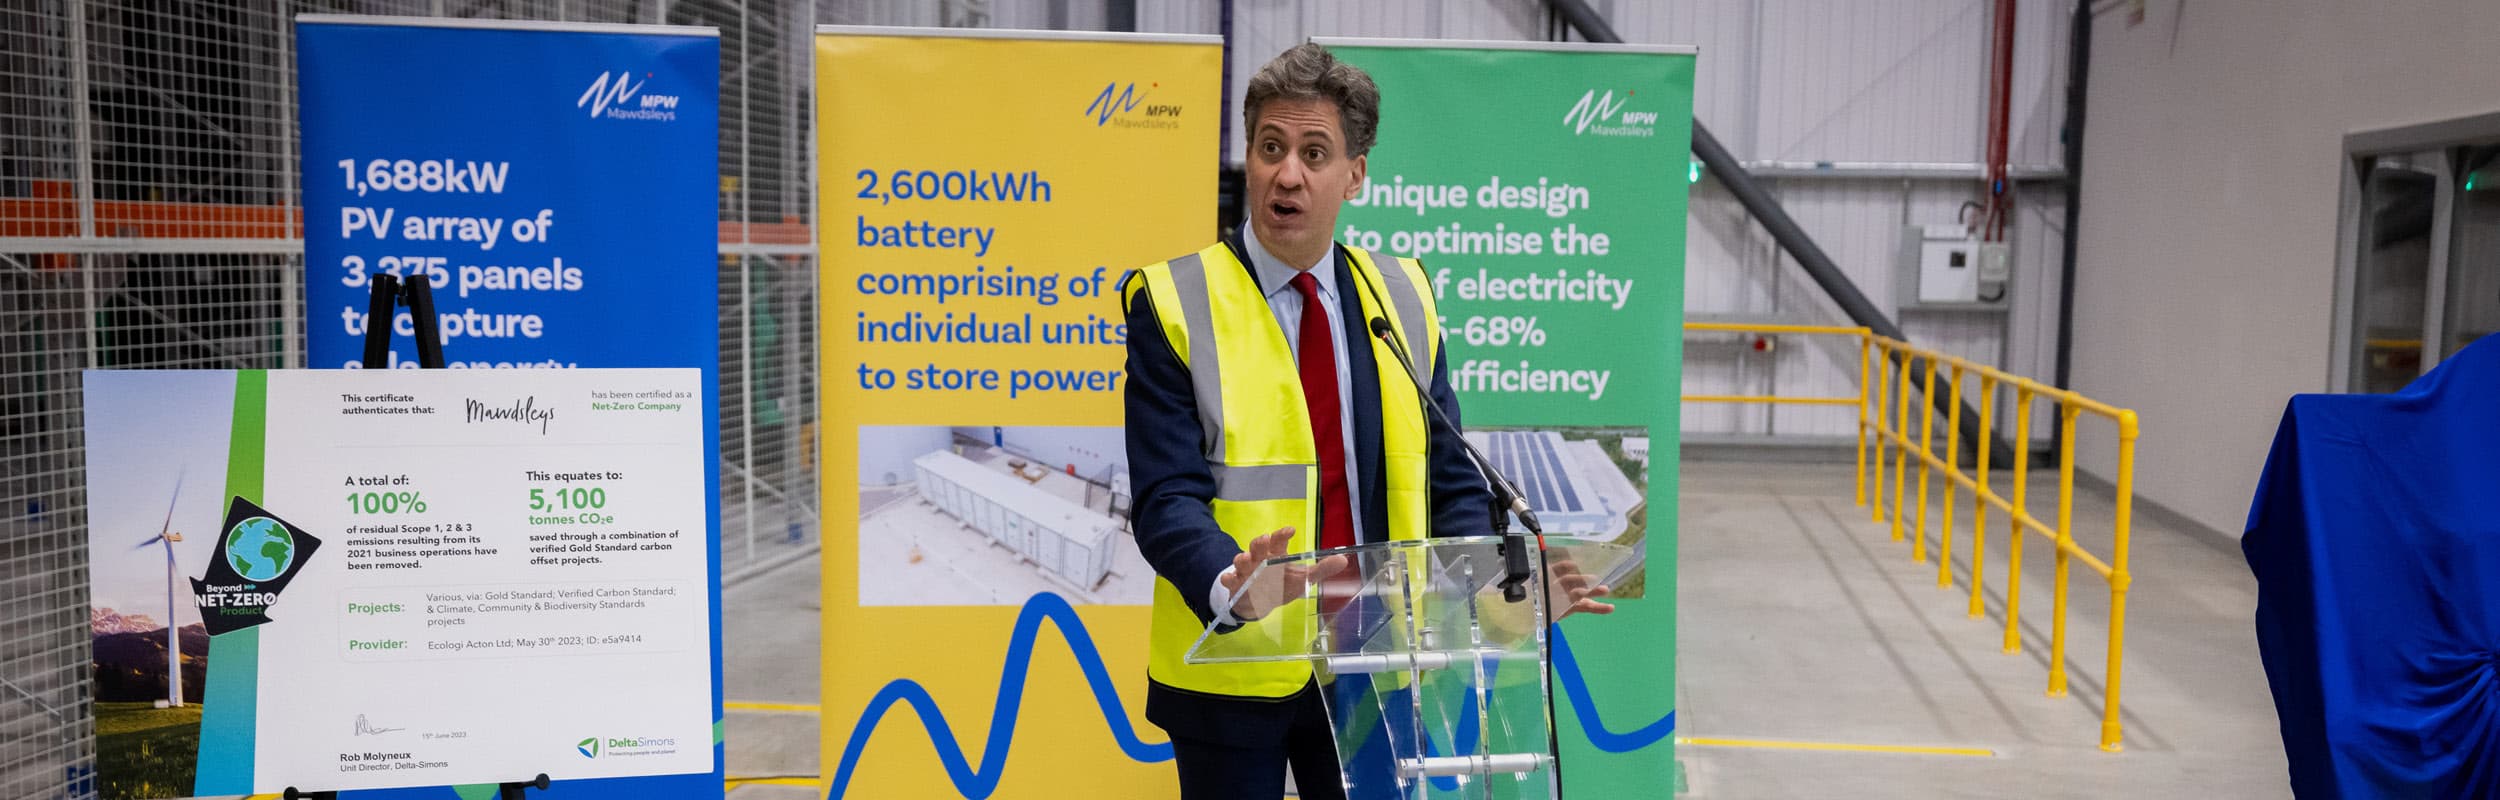 https://www.mawdsleys.co.uk/news/we-unveil-our-expanded-3pl-warehouse-bigger-and-greener-than-before/ thumbnail image